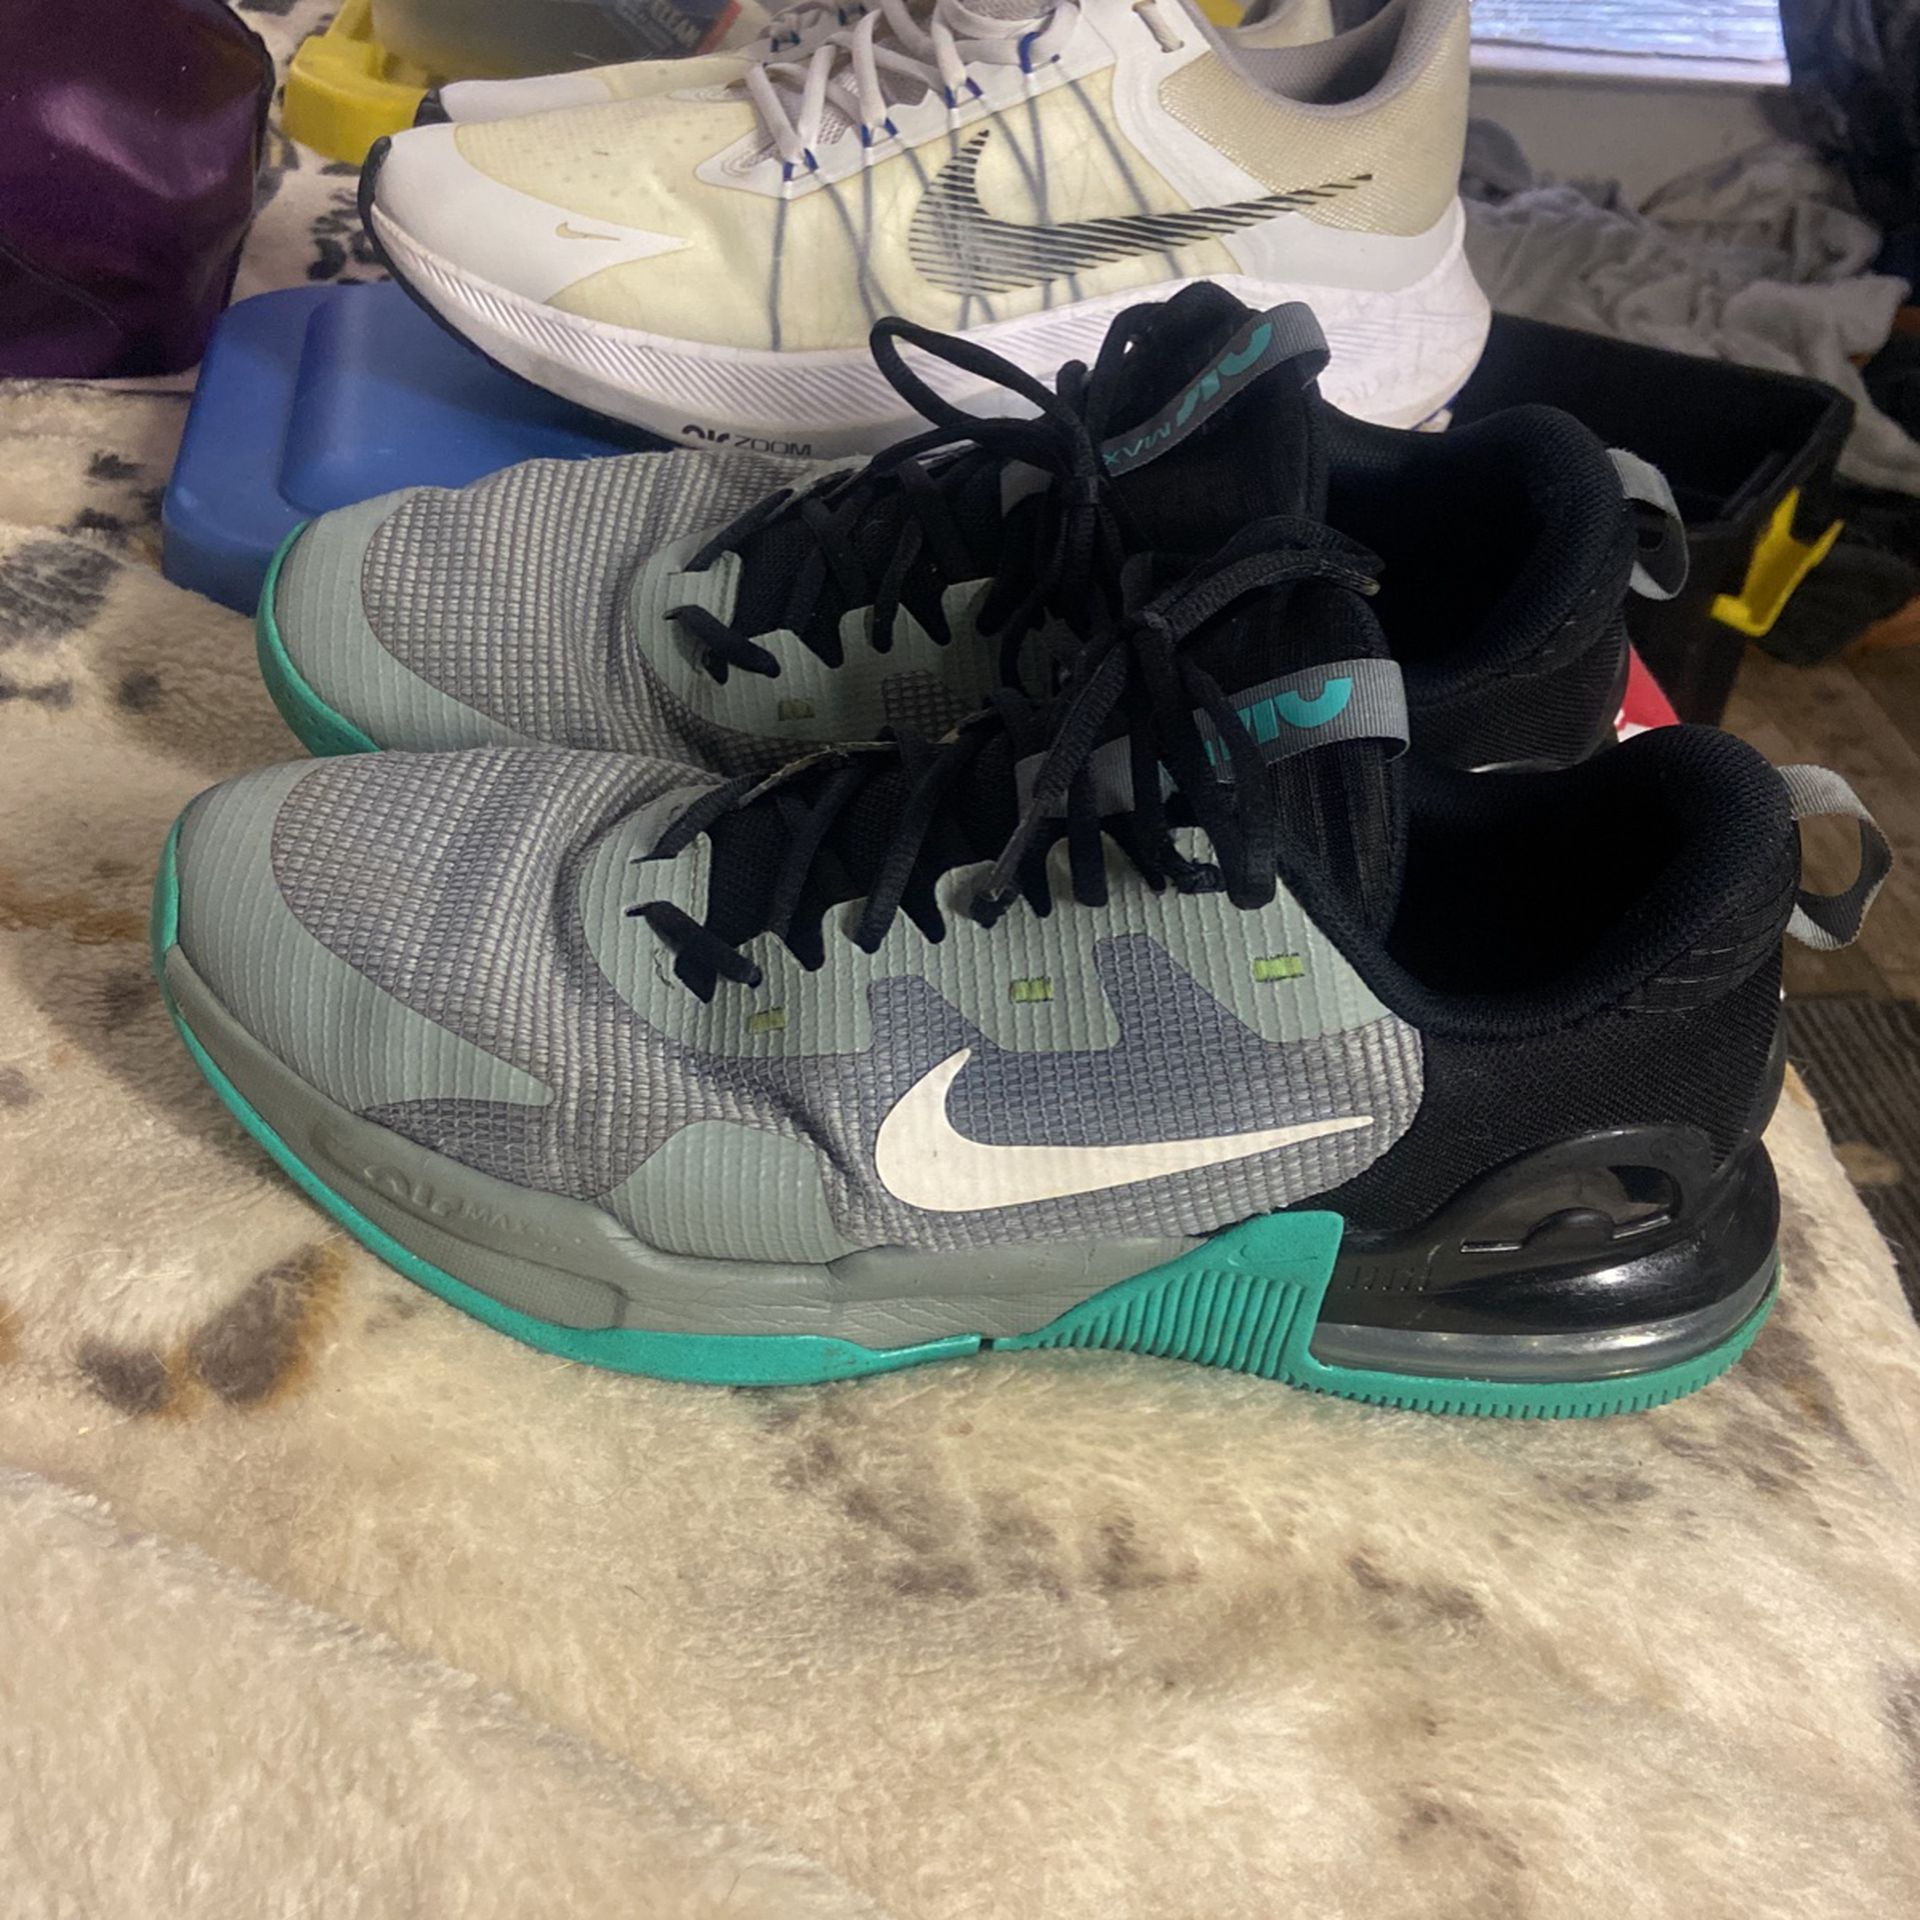 Two Pair Of Nike Side Size 12